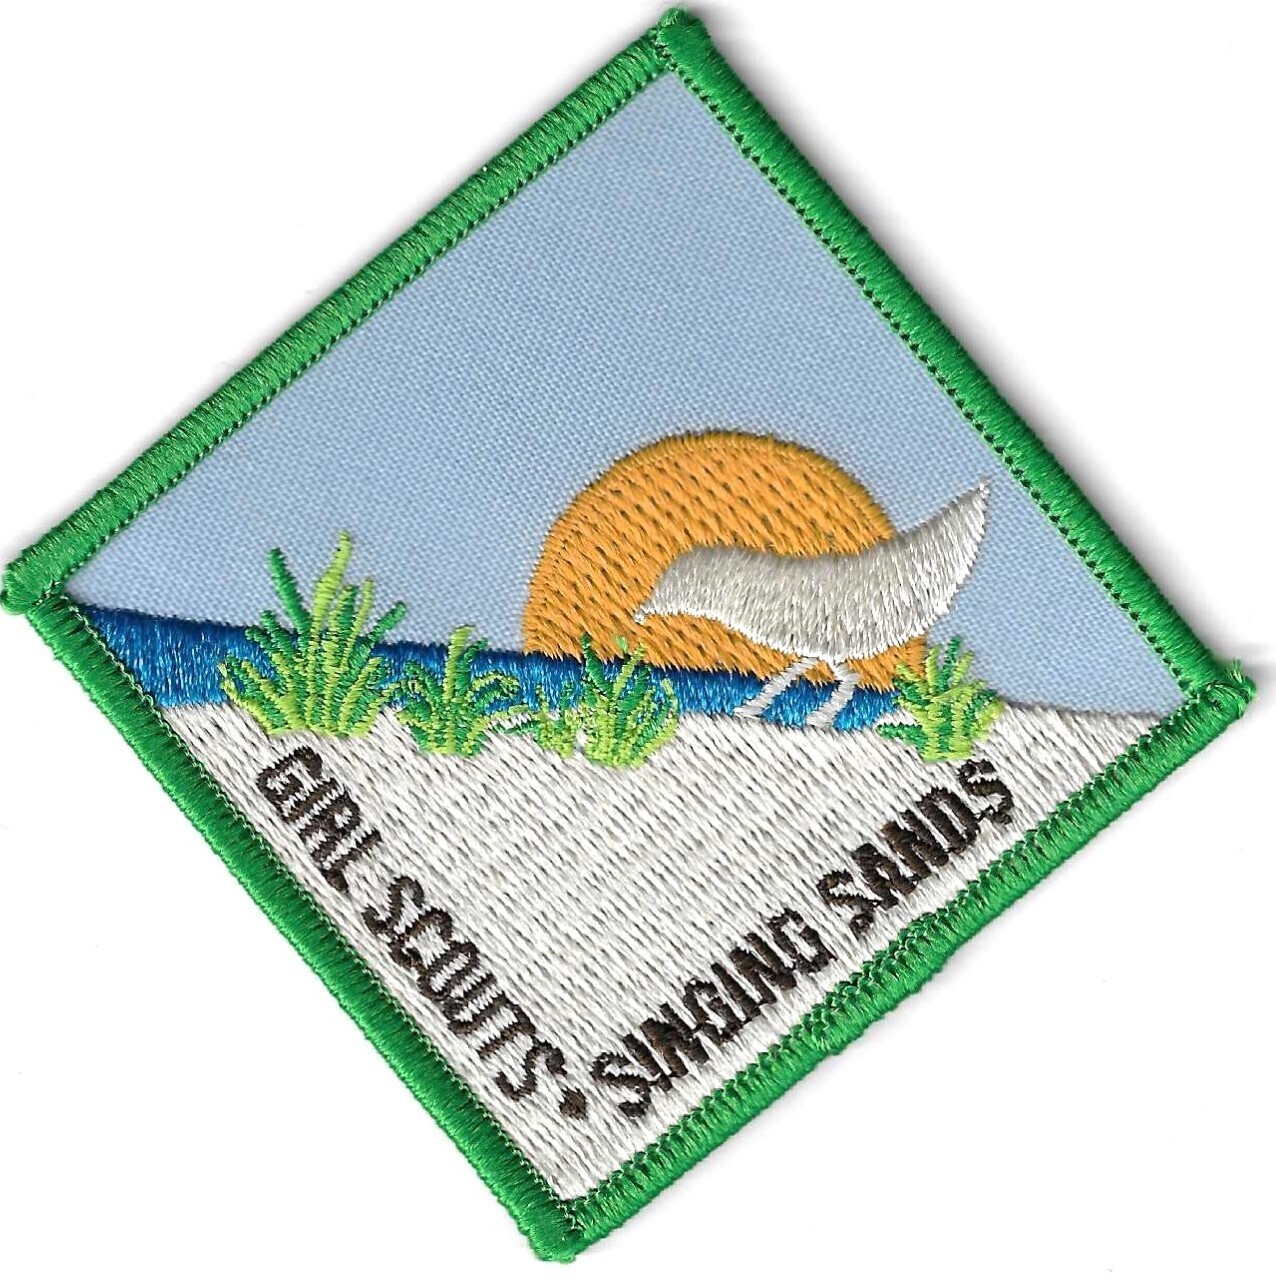 Singing Sands (GS) council patch (IN)